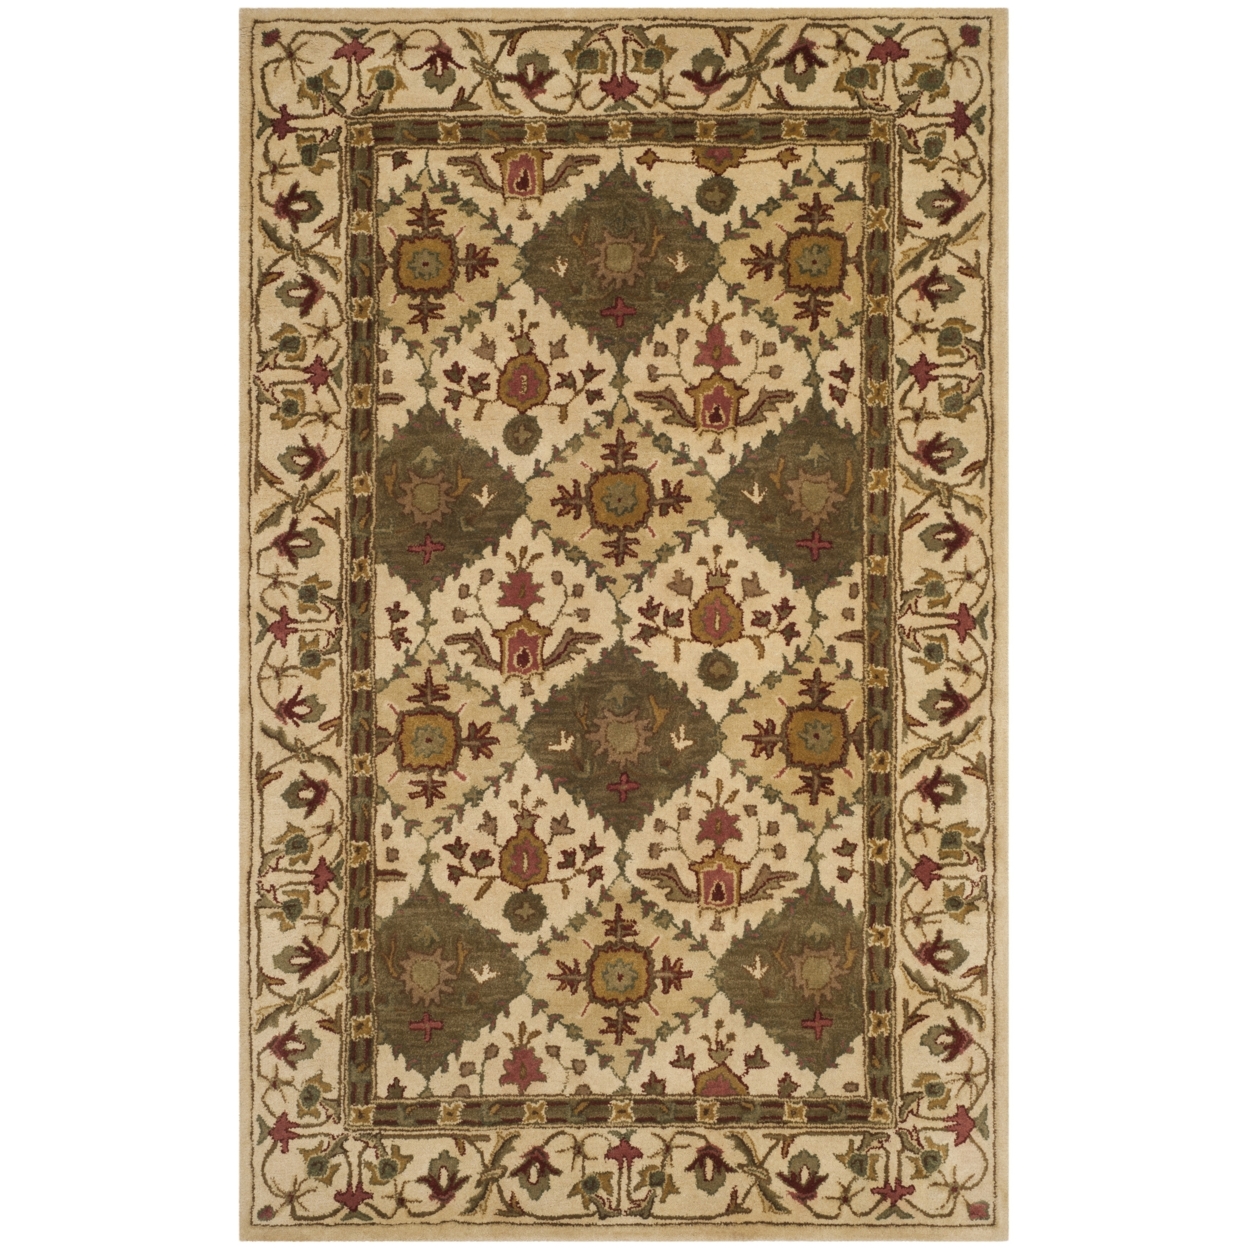 SAFAVIEH Antiquity Collection AT57D Handmade Beige Rug - 7' 6 X 9' 6 Oval